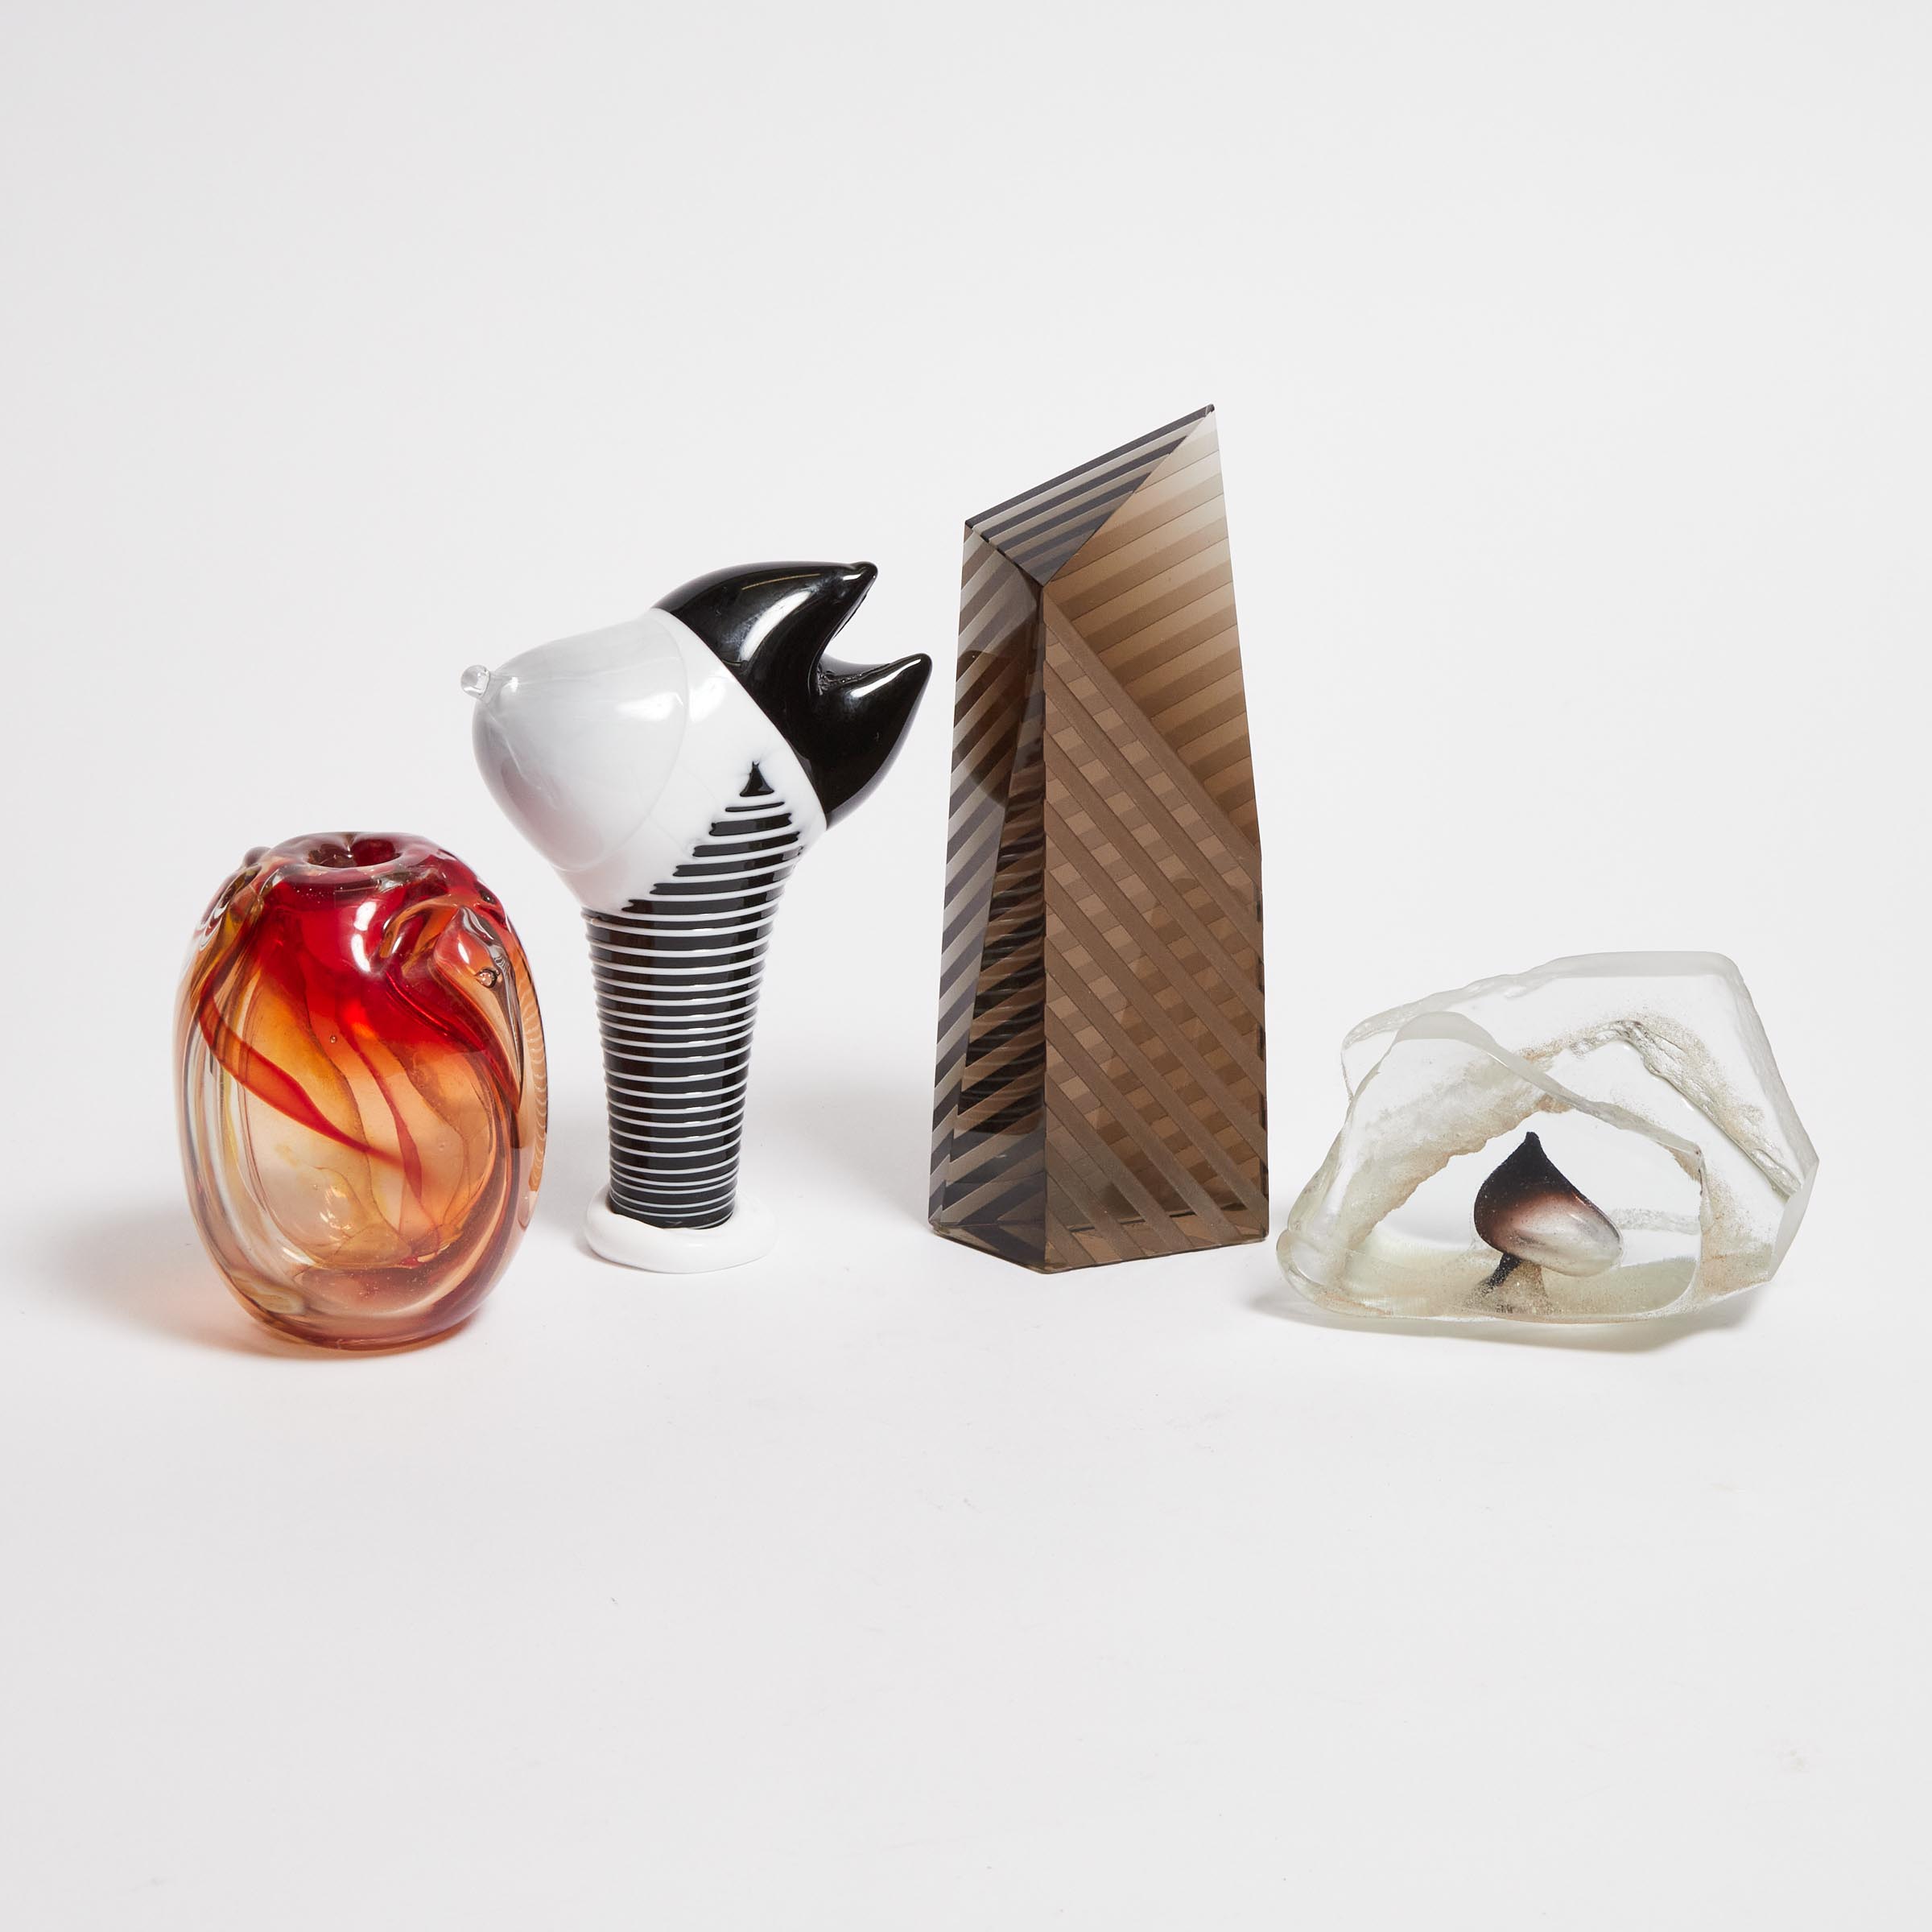 Four Studio Glass Sculptures and